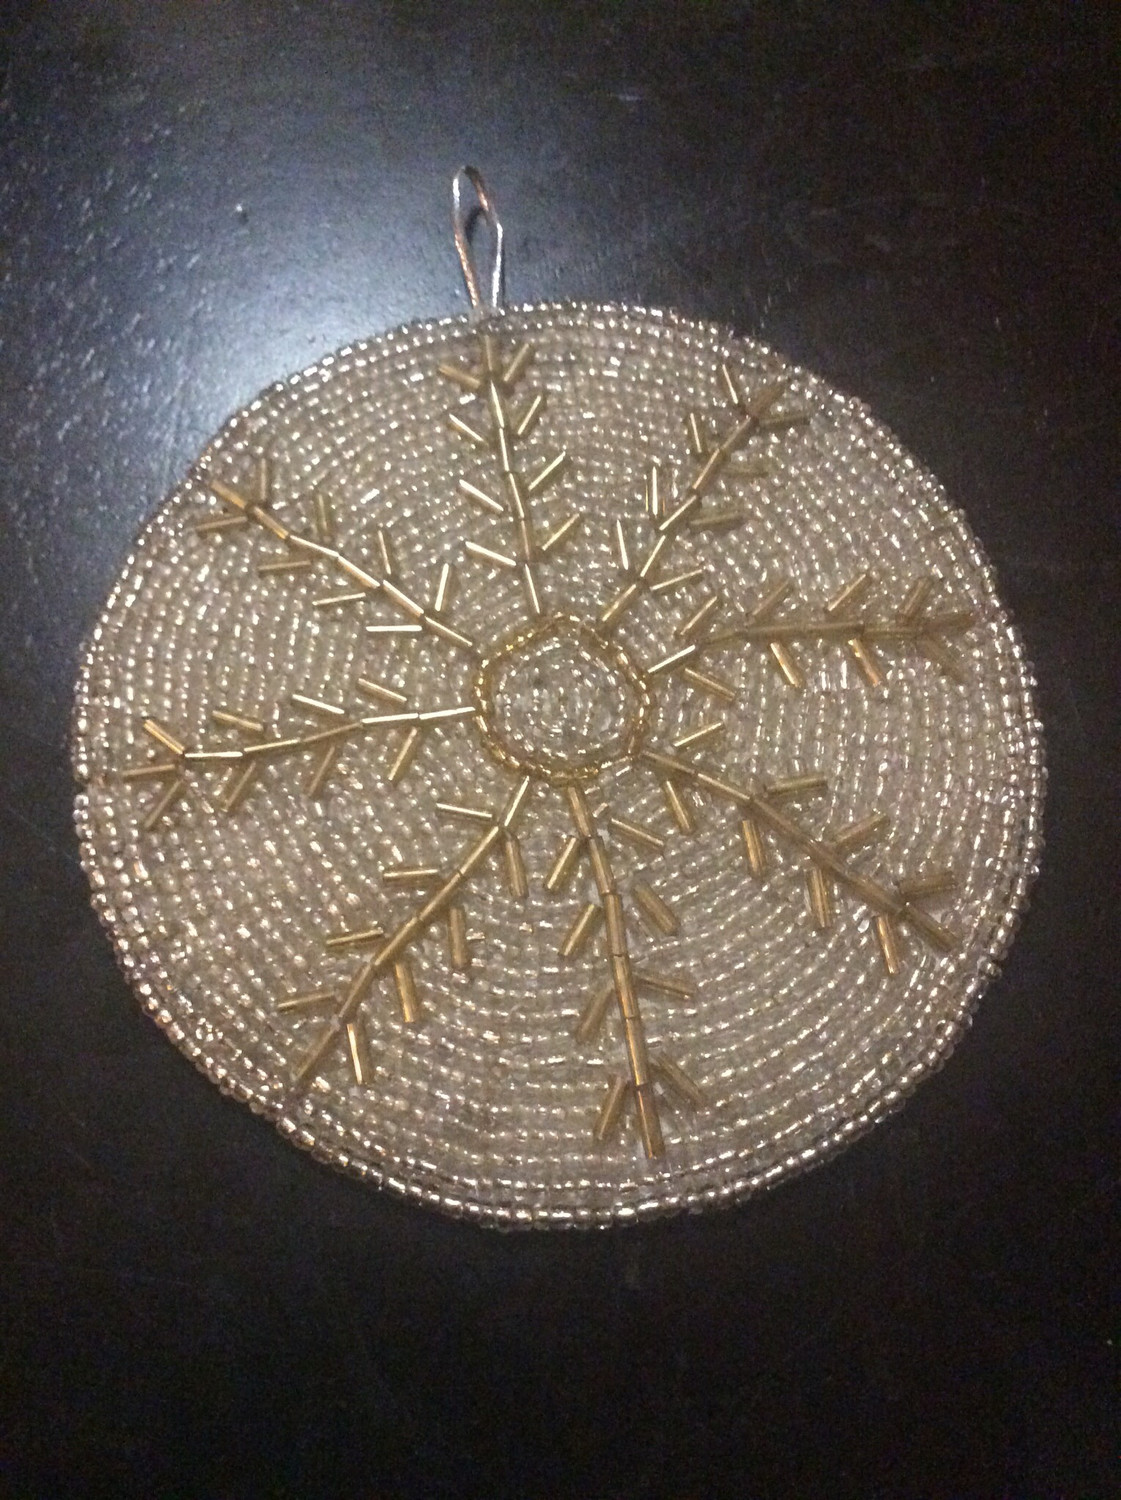 Beaded Flat Ornament Solomon Seal Enchanted Protection From All Dangers Disasters Detriment